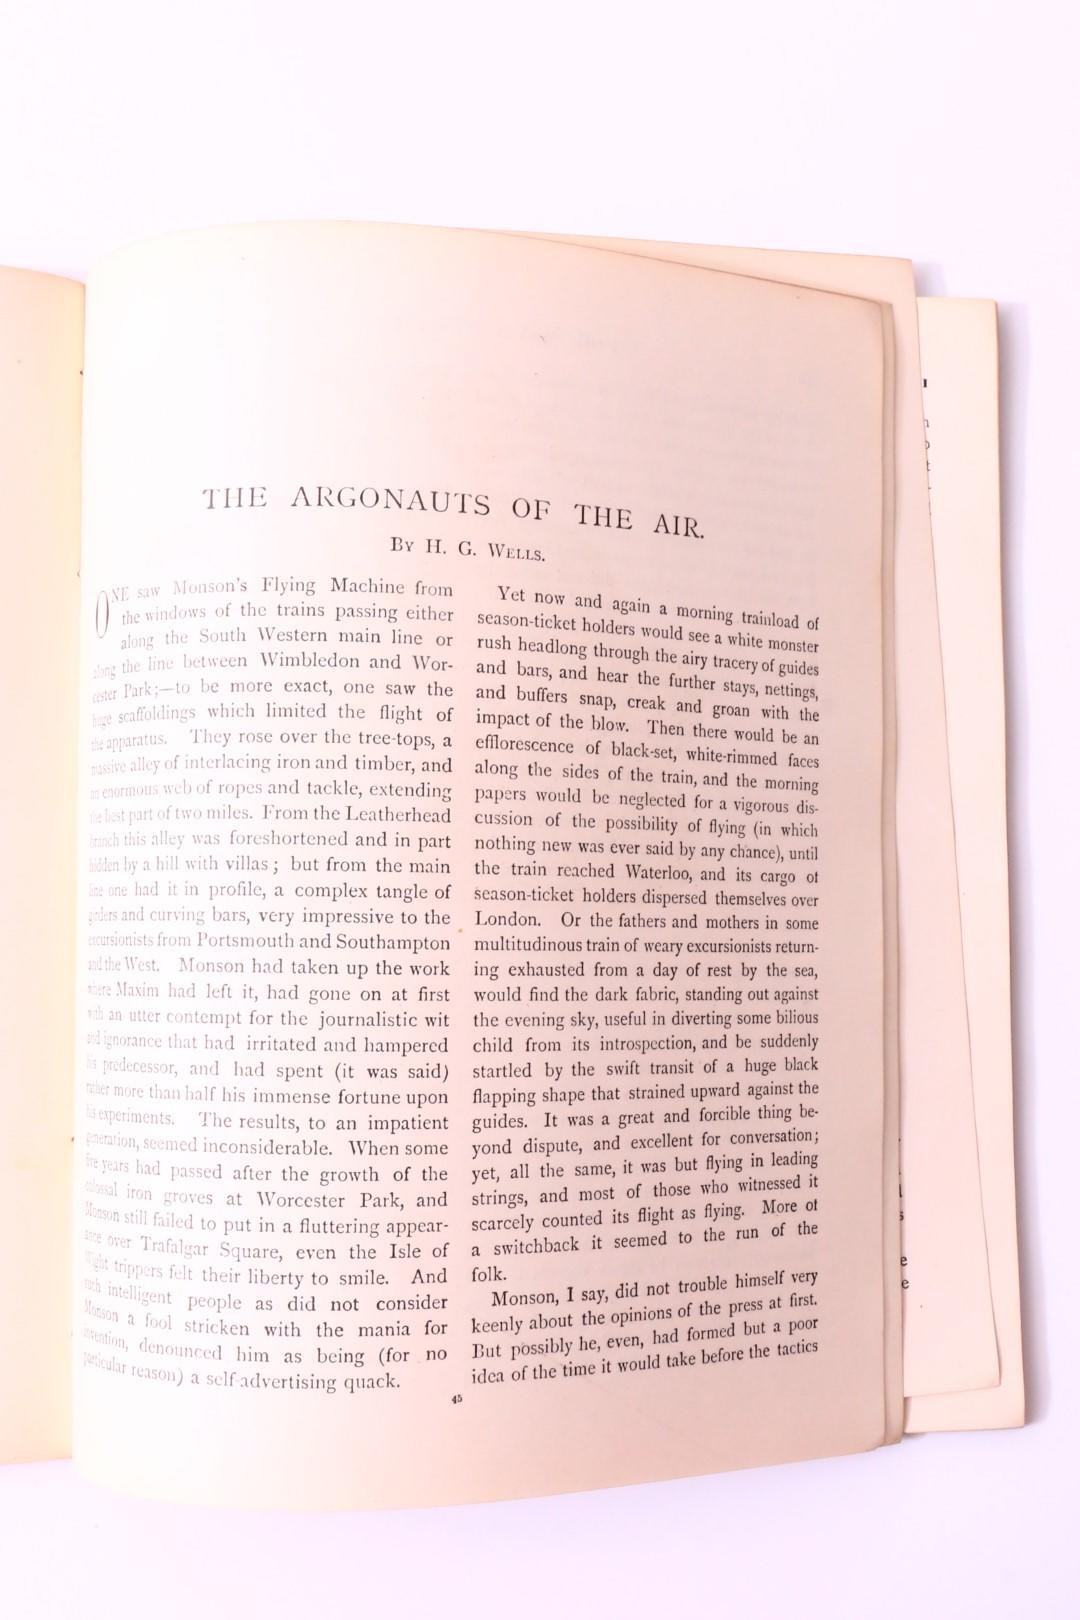 H.G. Wells - The Argonauts of the Air [in] Phil May's Illustrated Winter Annual for 1895 - Bouverie House, 1895, First Edition.